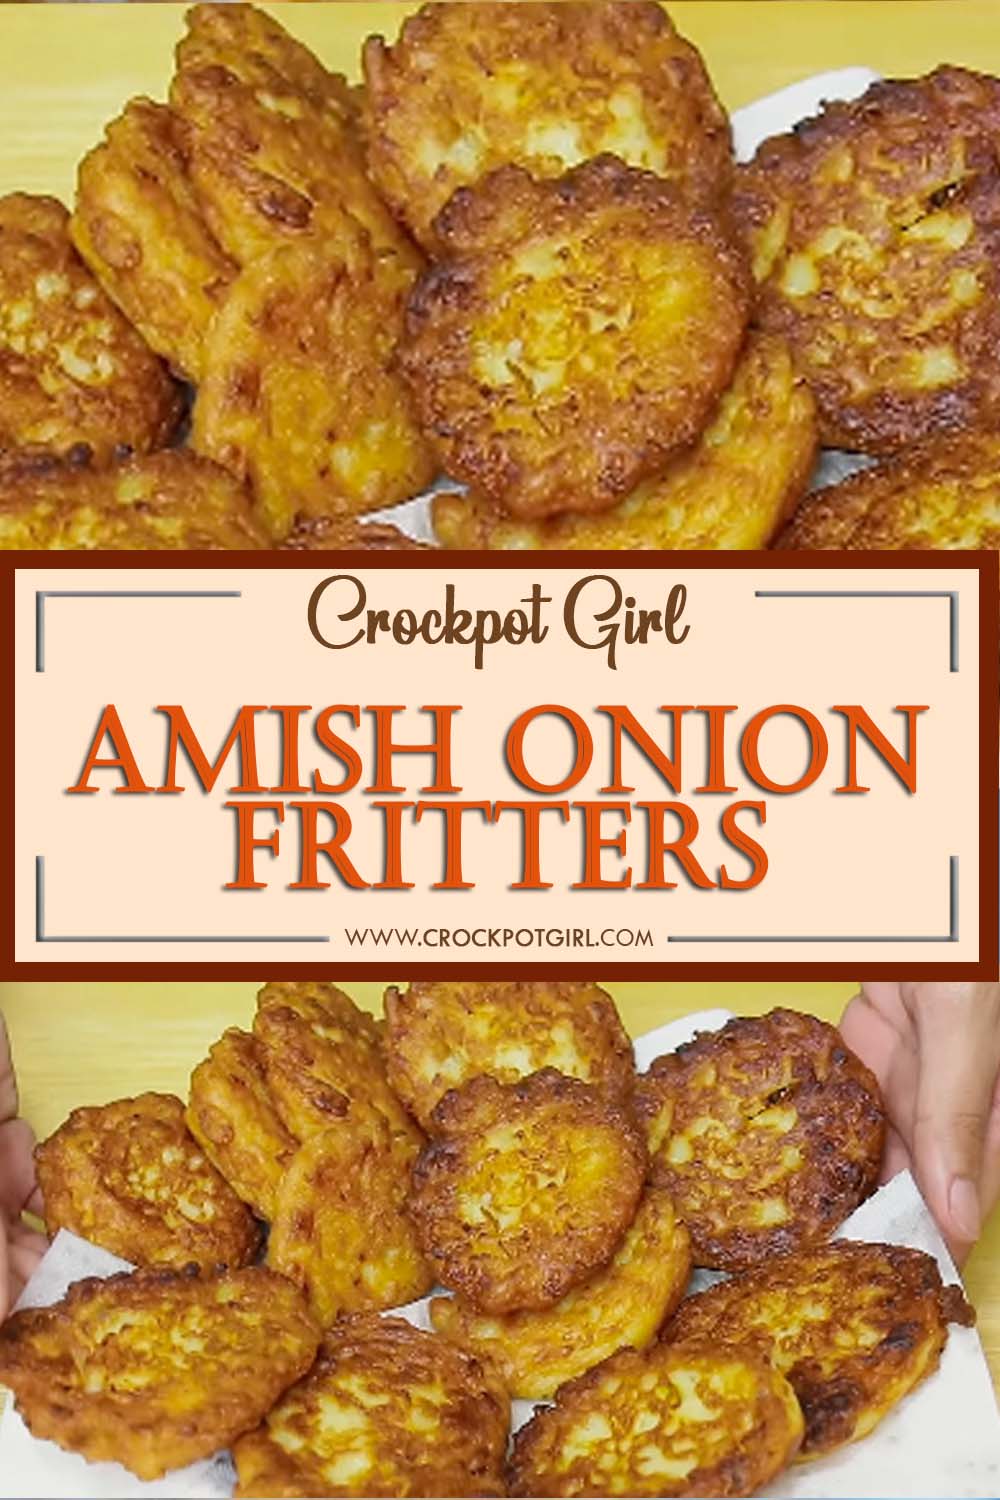 Amish Onion Fritters Recipe